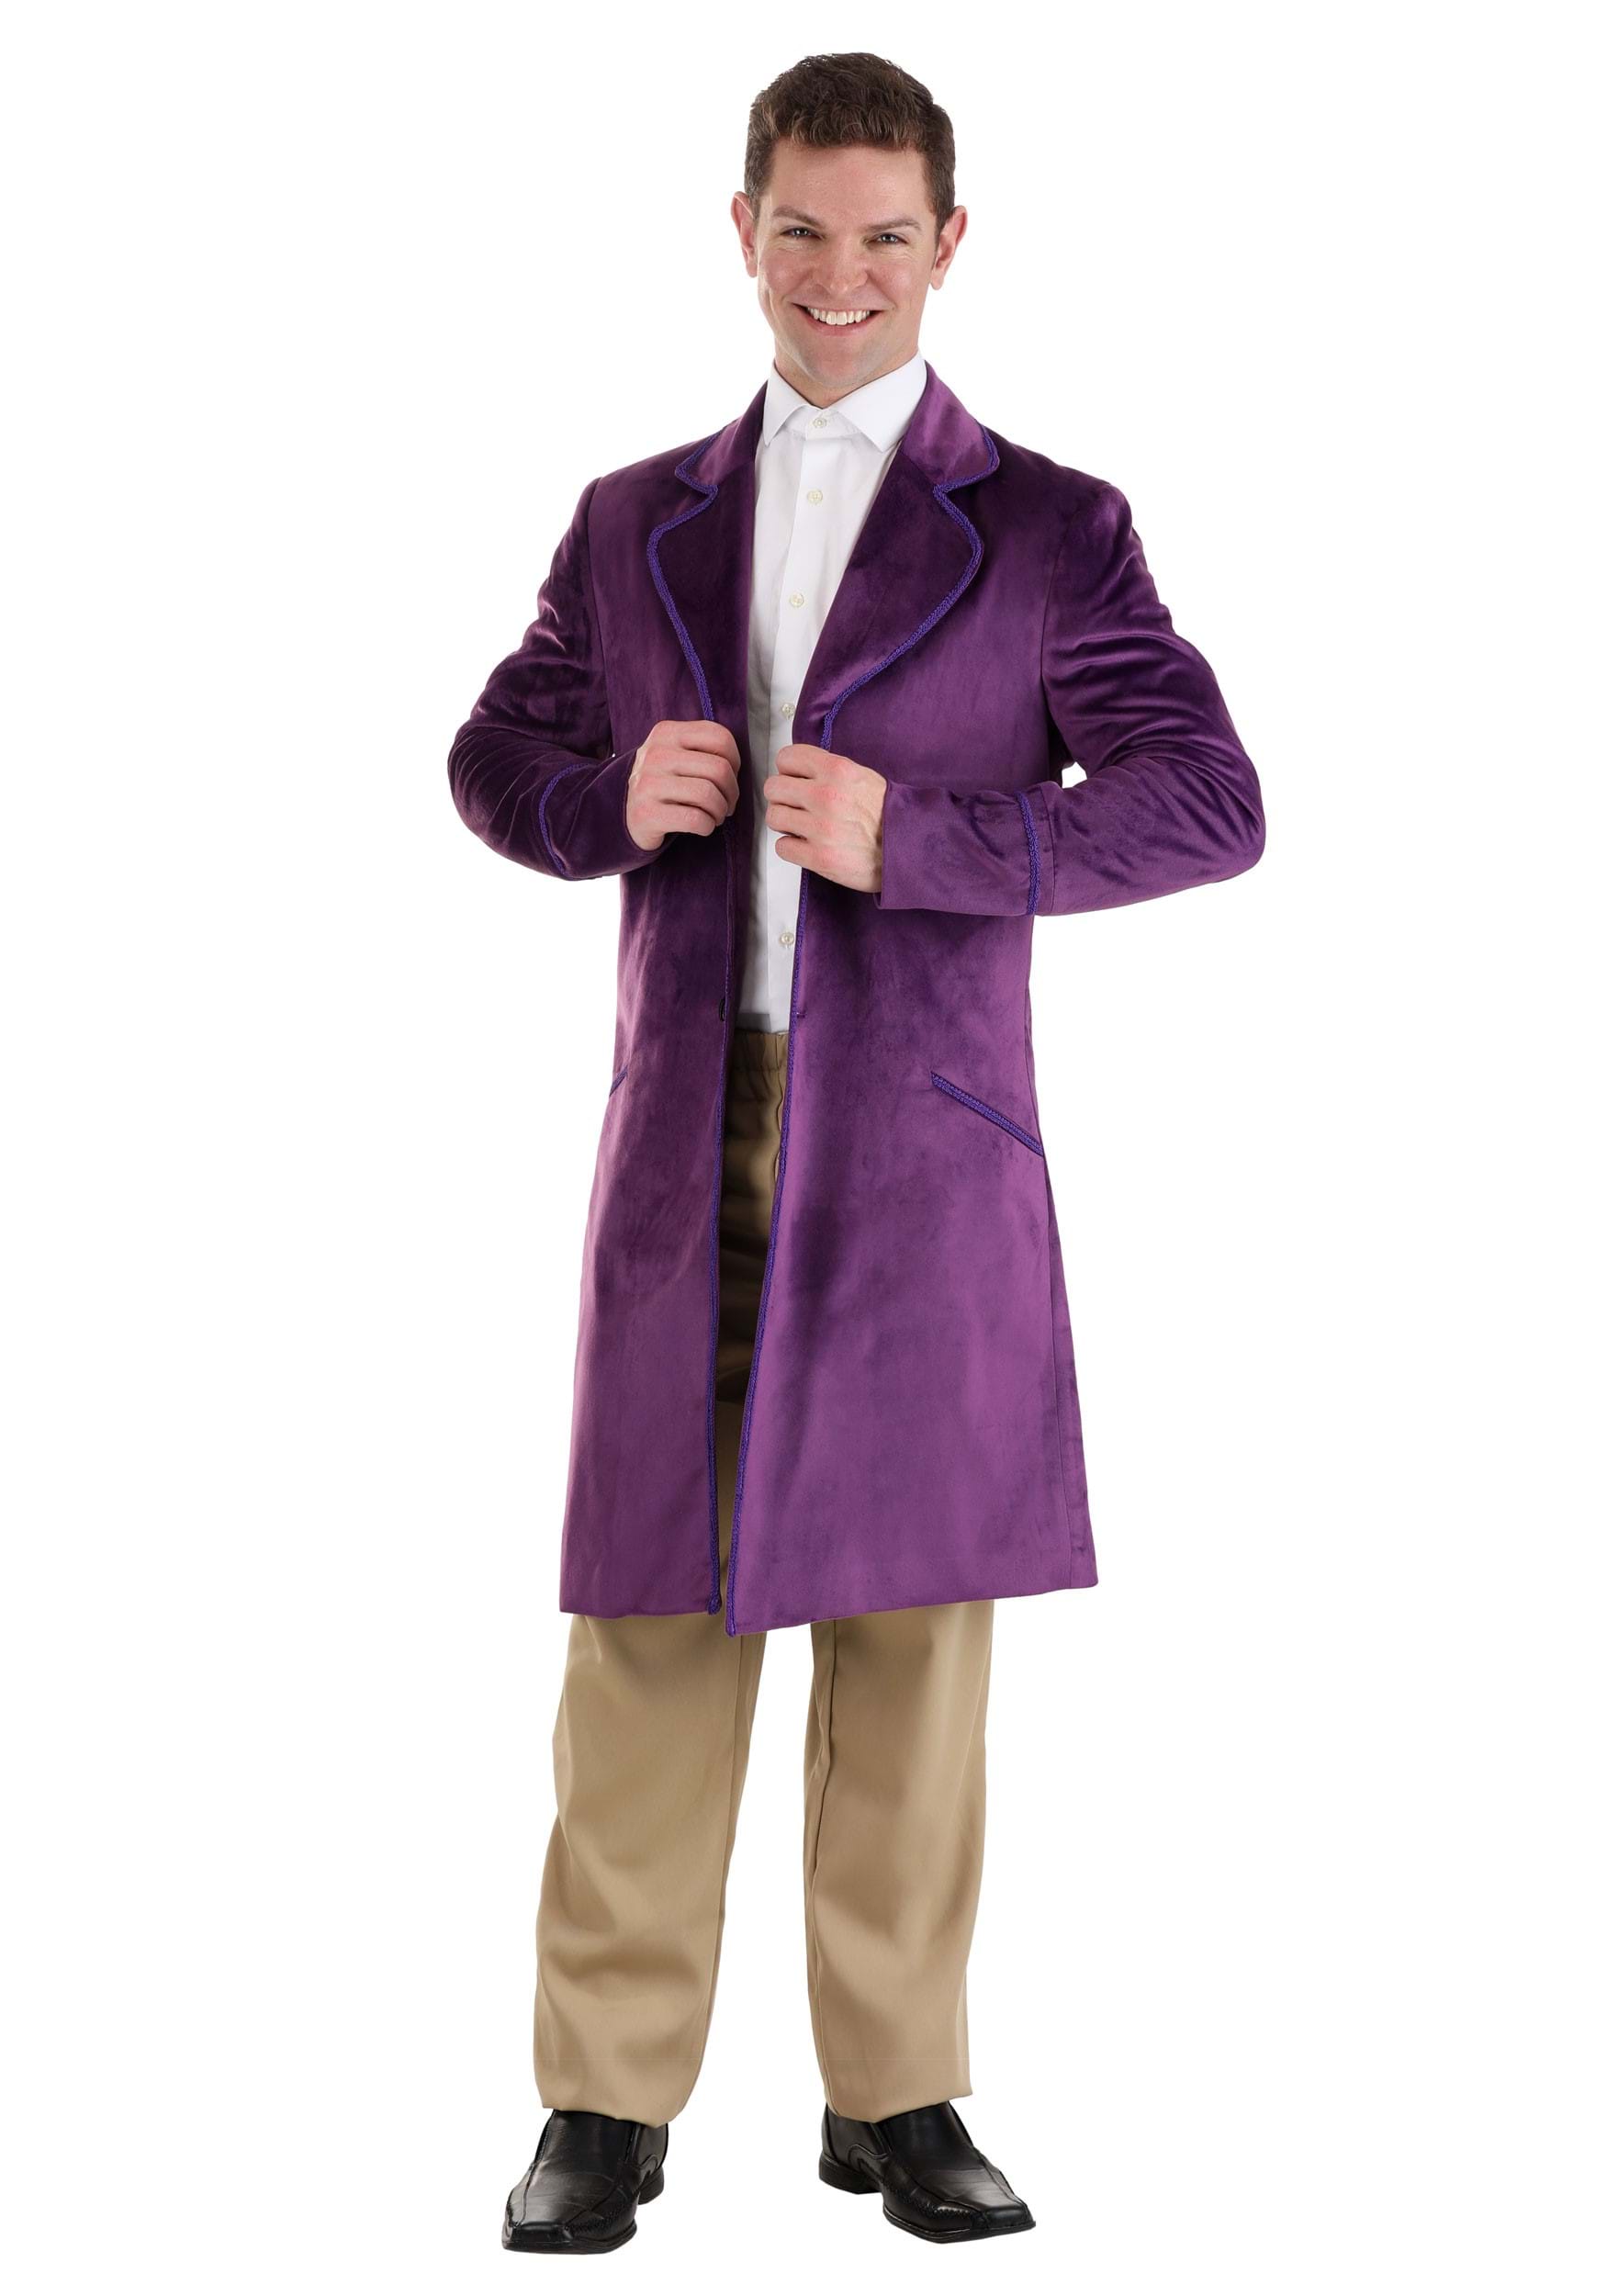 Photos - Fancy Dress FUN Costumes Authentic Willy Wonka Men's Costume Jacket | Adult Costumes P